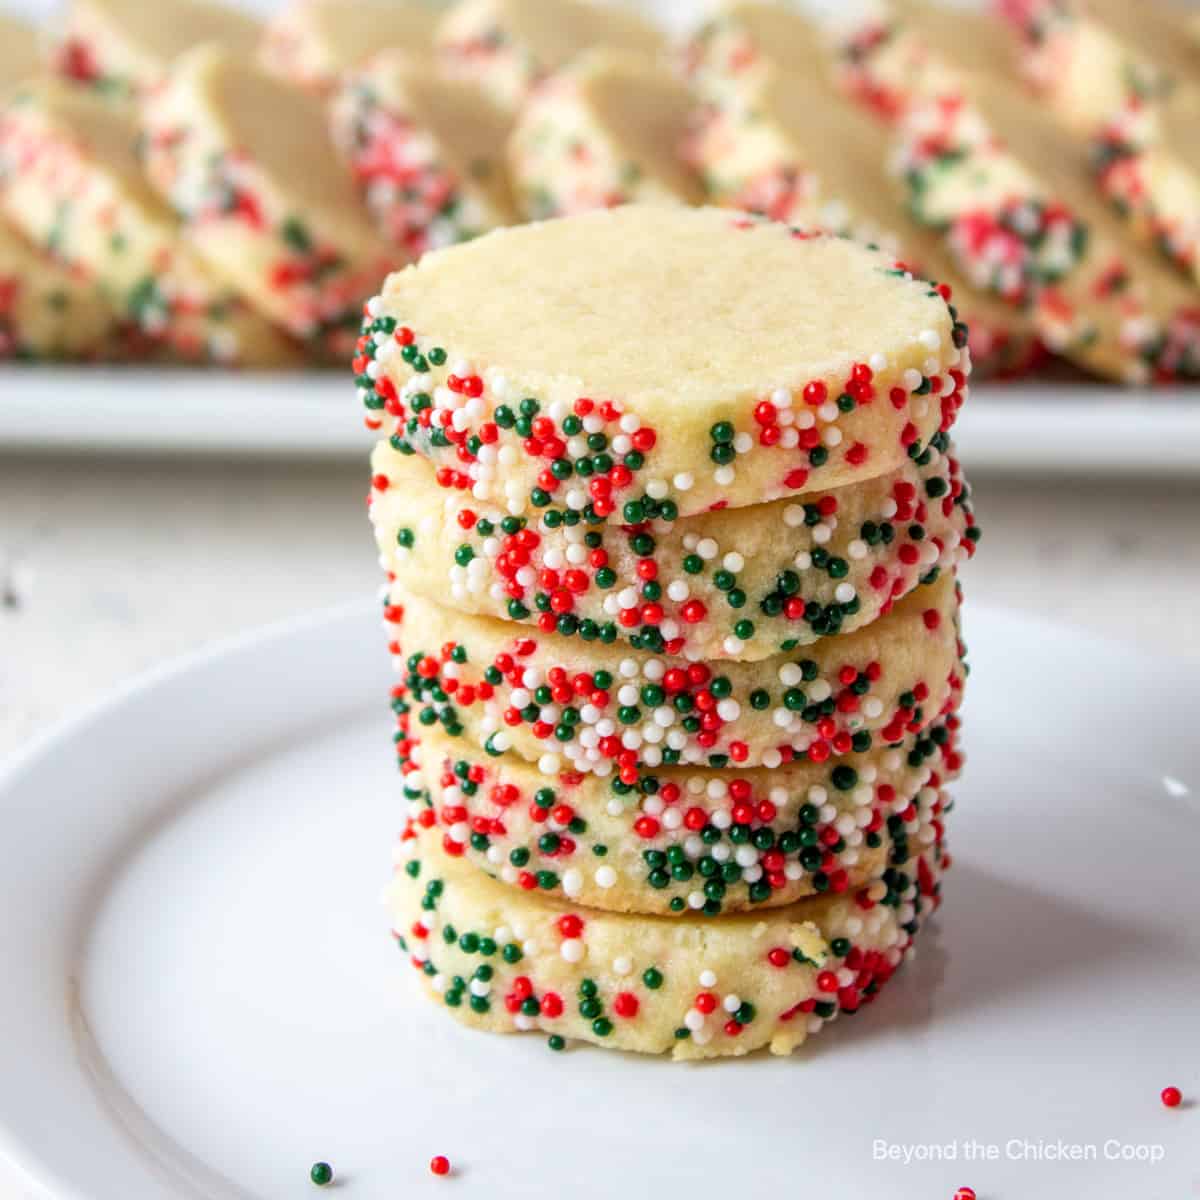 A stack of round cookies covered with colorful sprinkles.